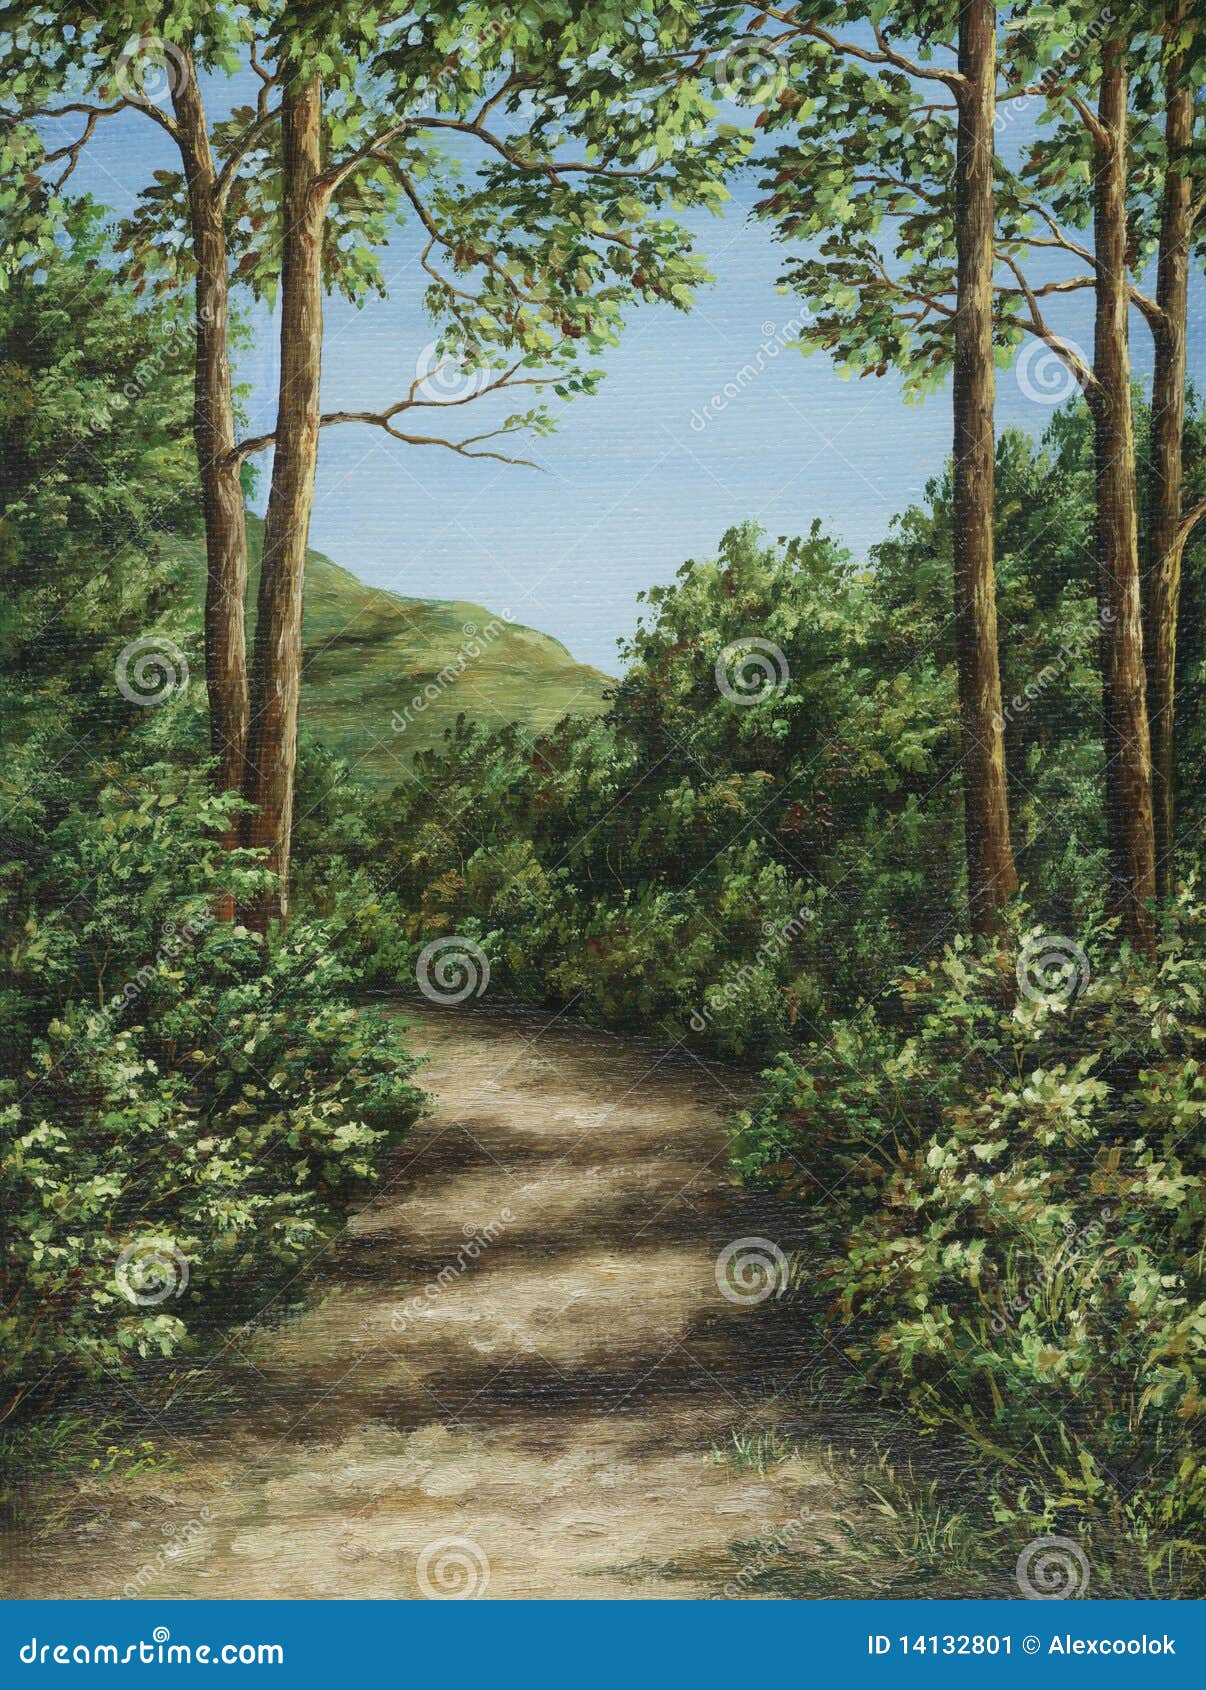 footpath in mountain wood